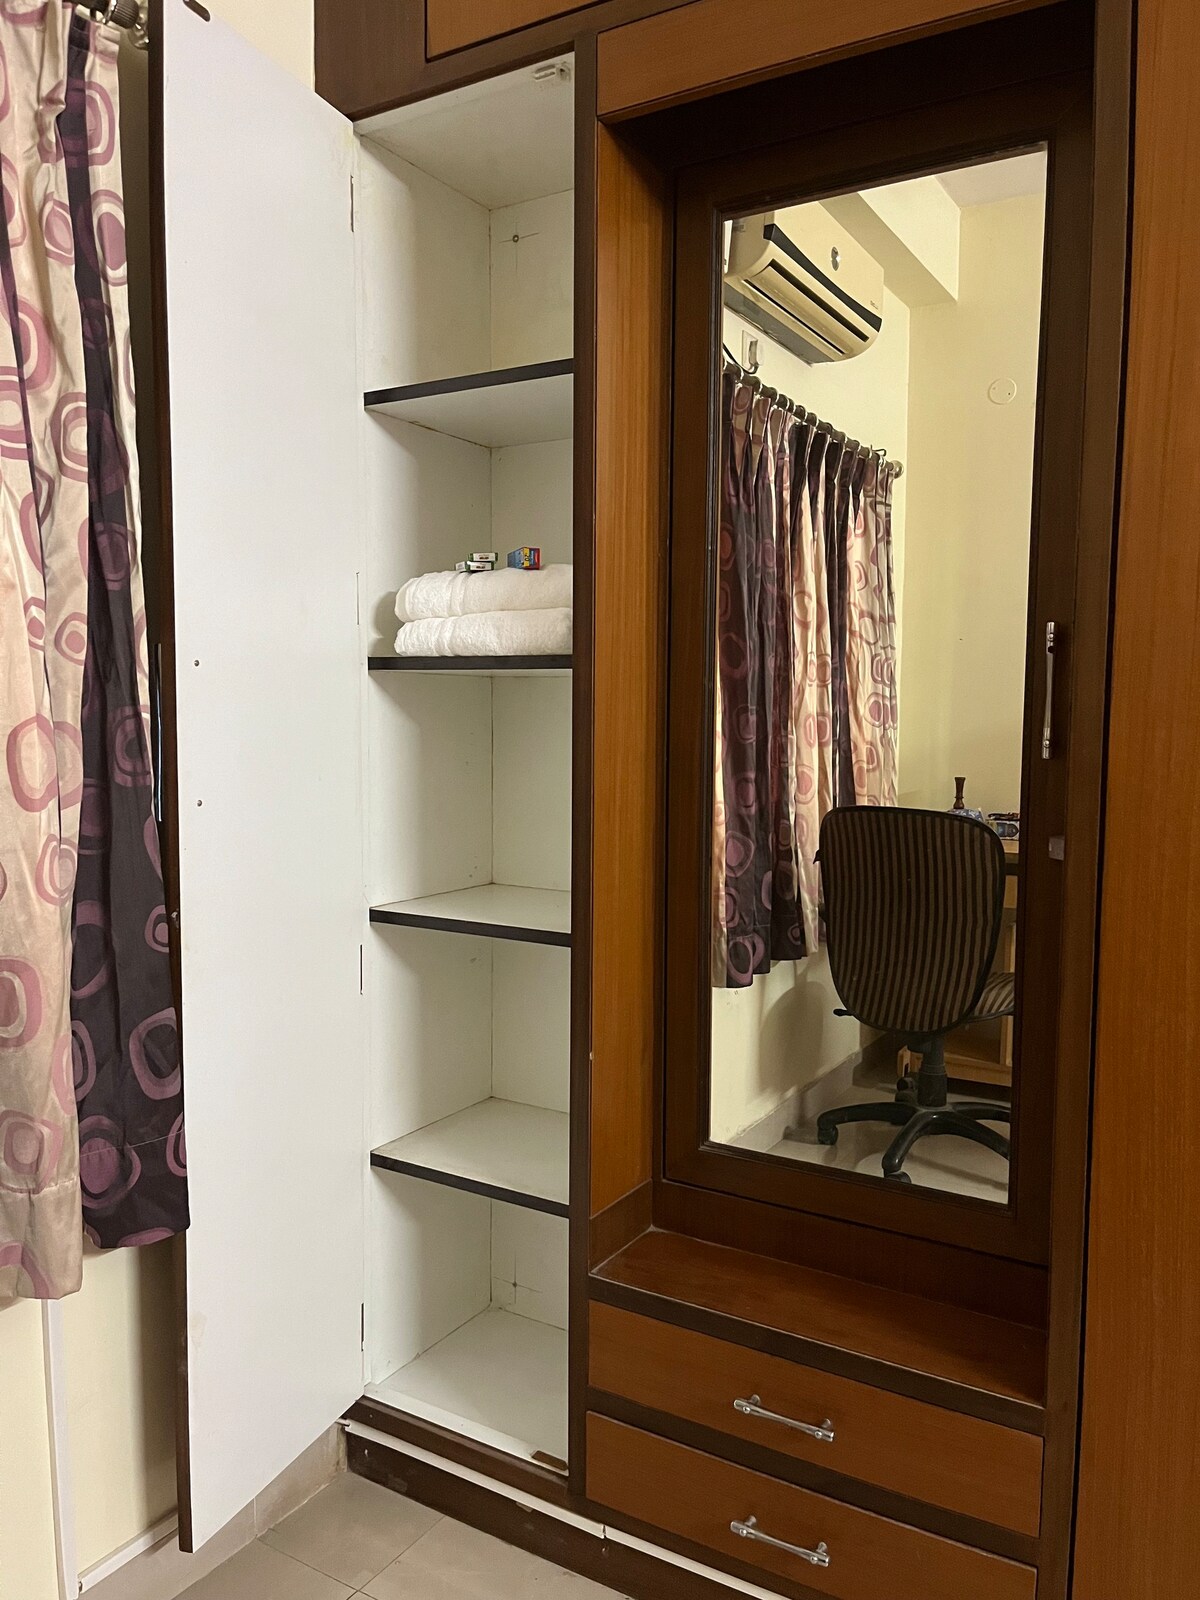 1 room in a 3 bhk apartment with free space for TV